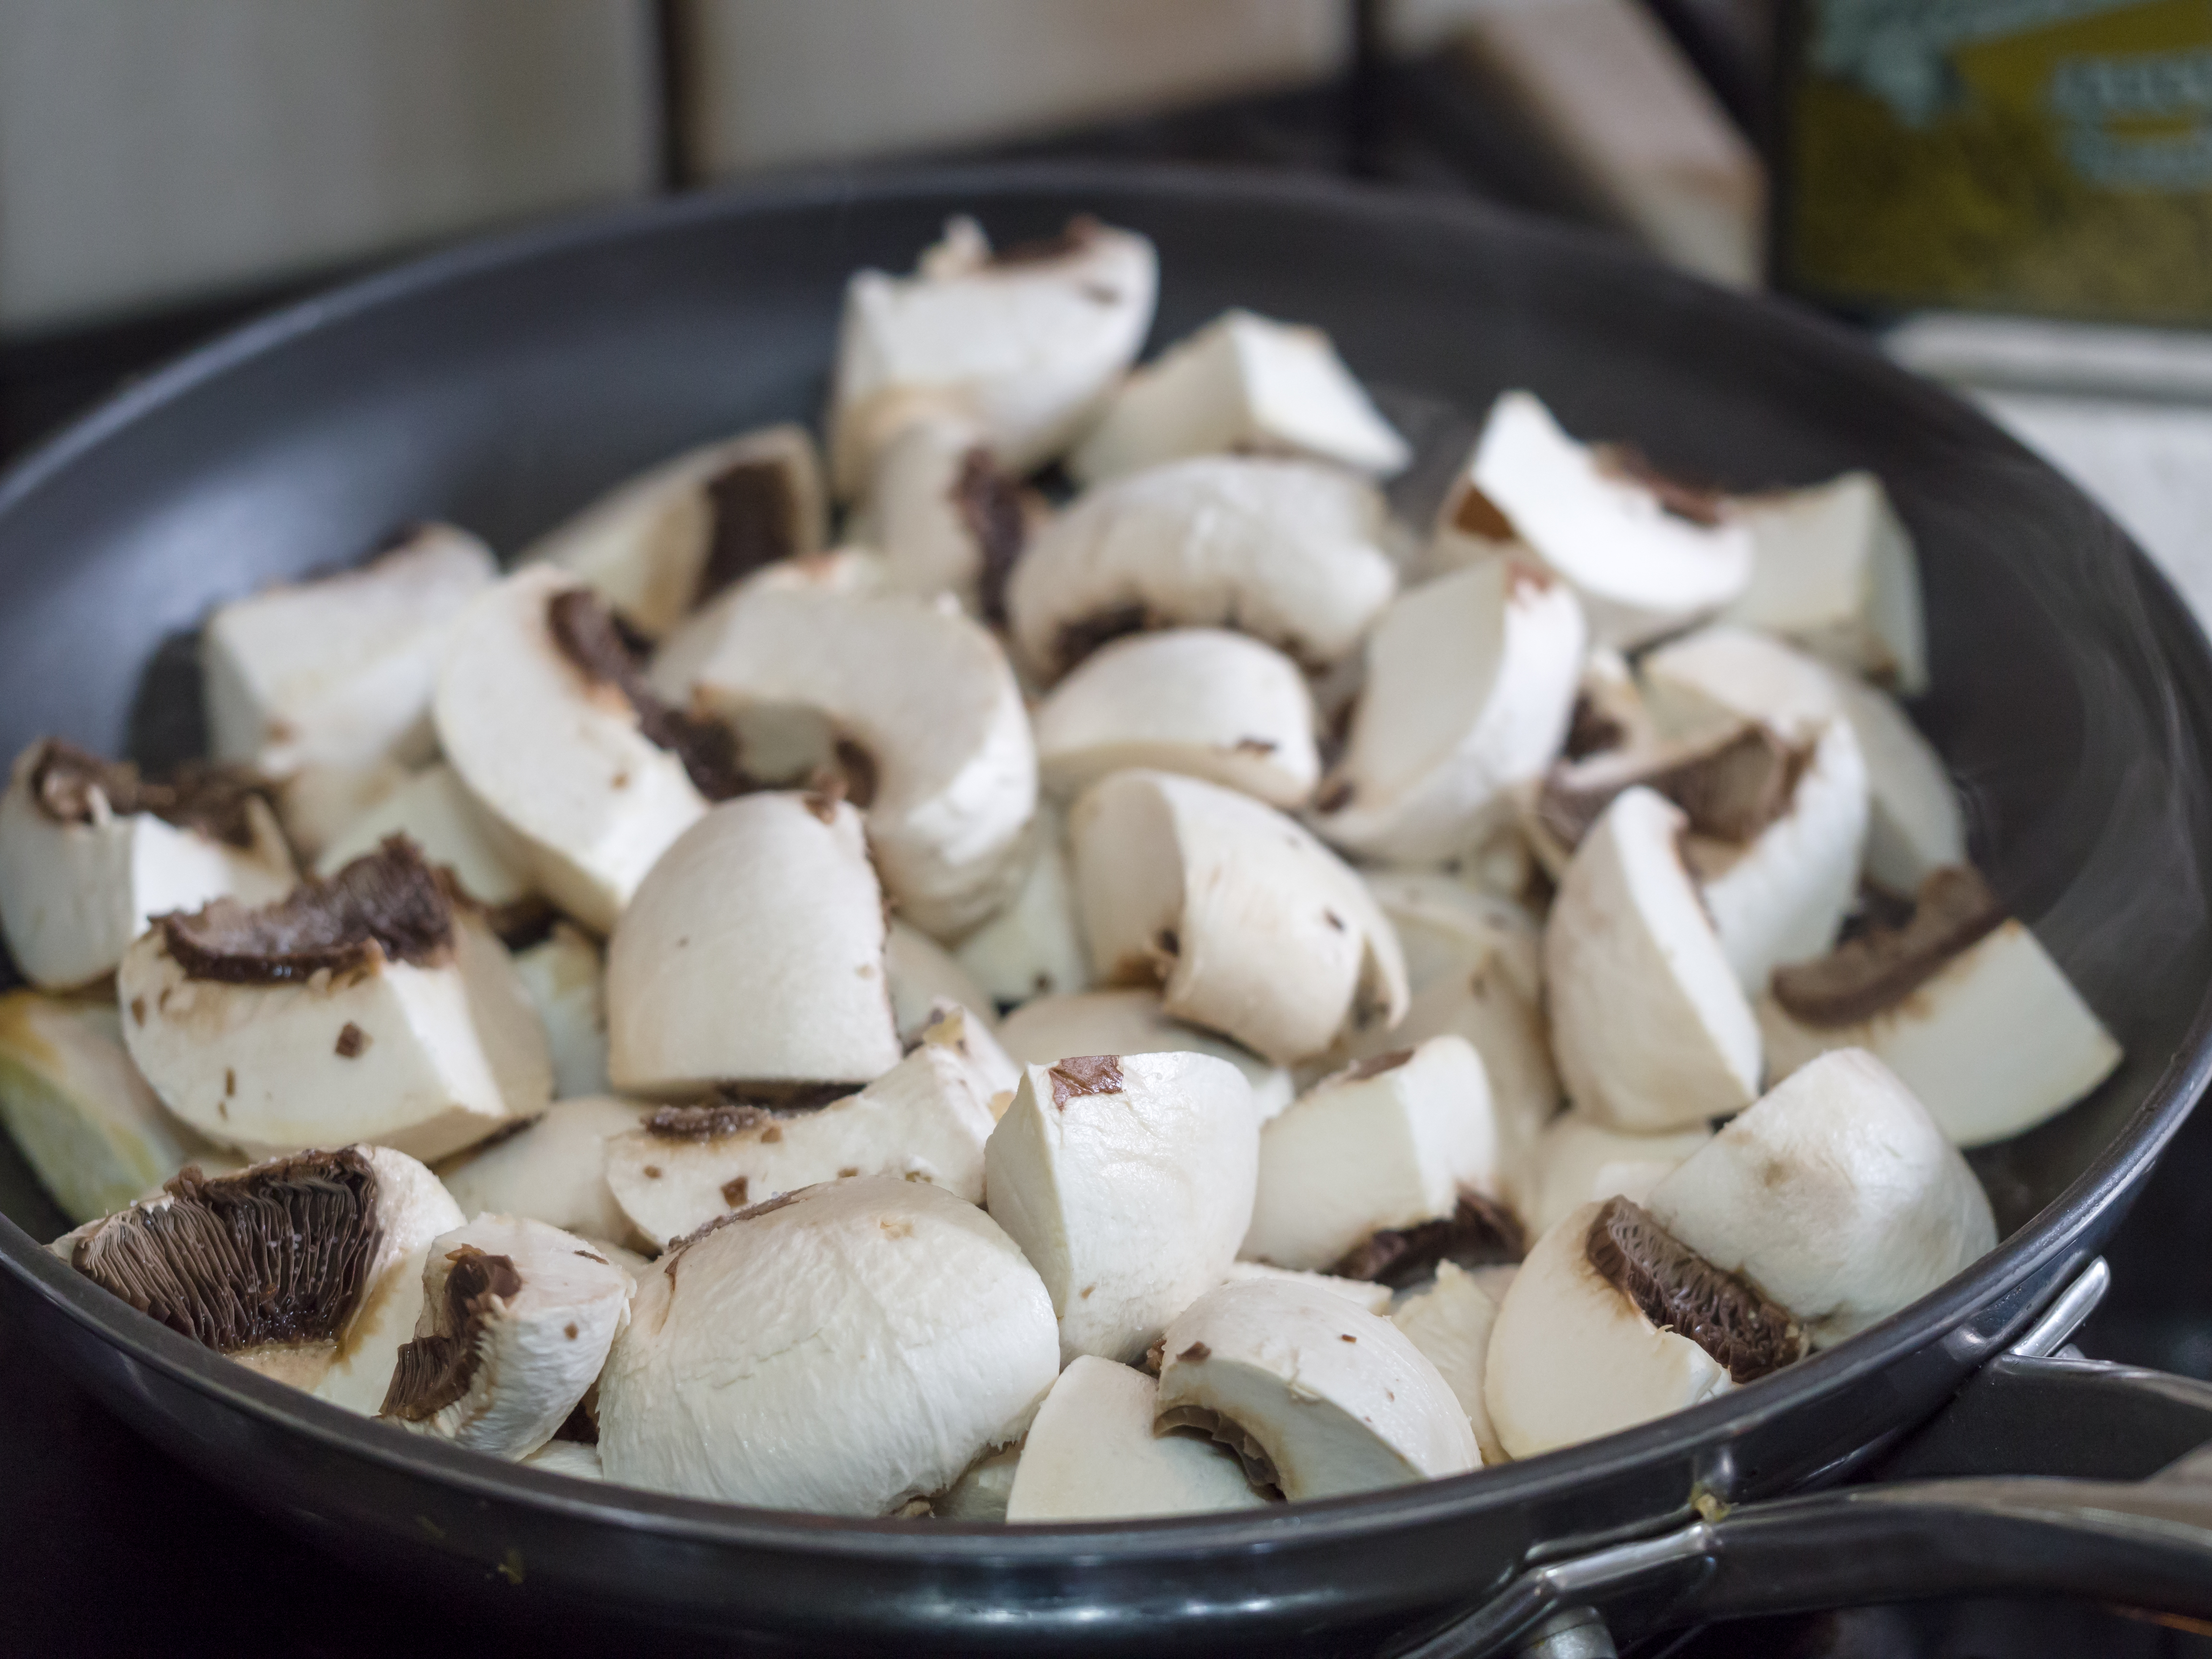 A kitchen frying pan holds several cut up mushrooms.